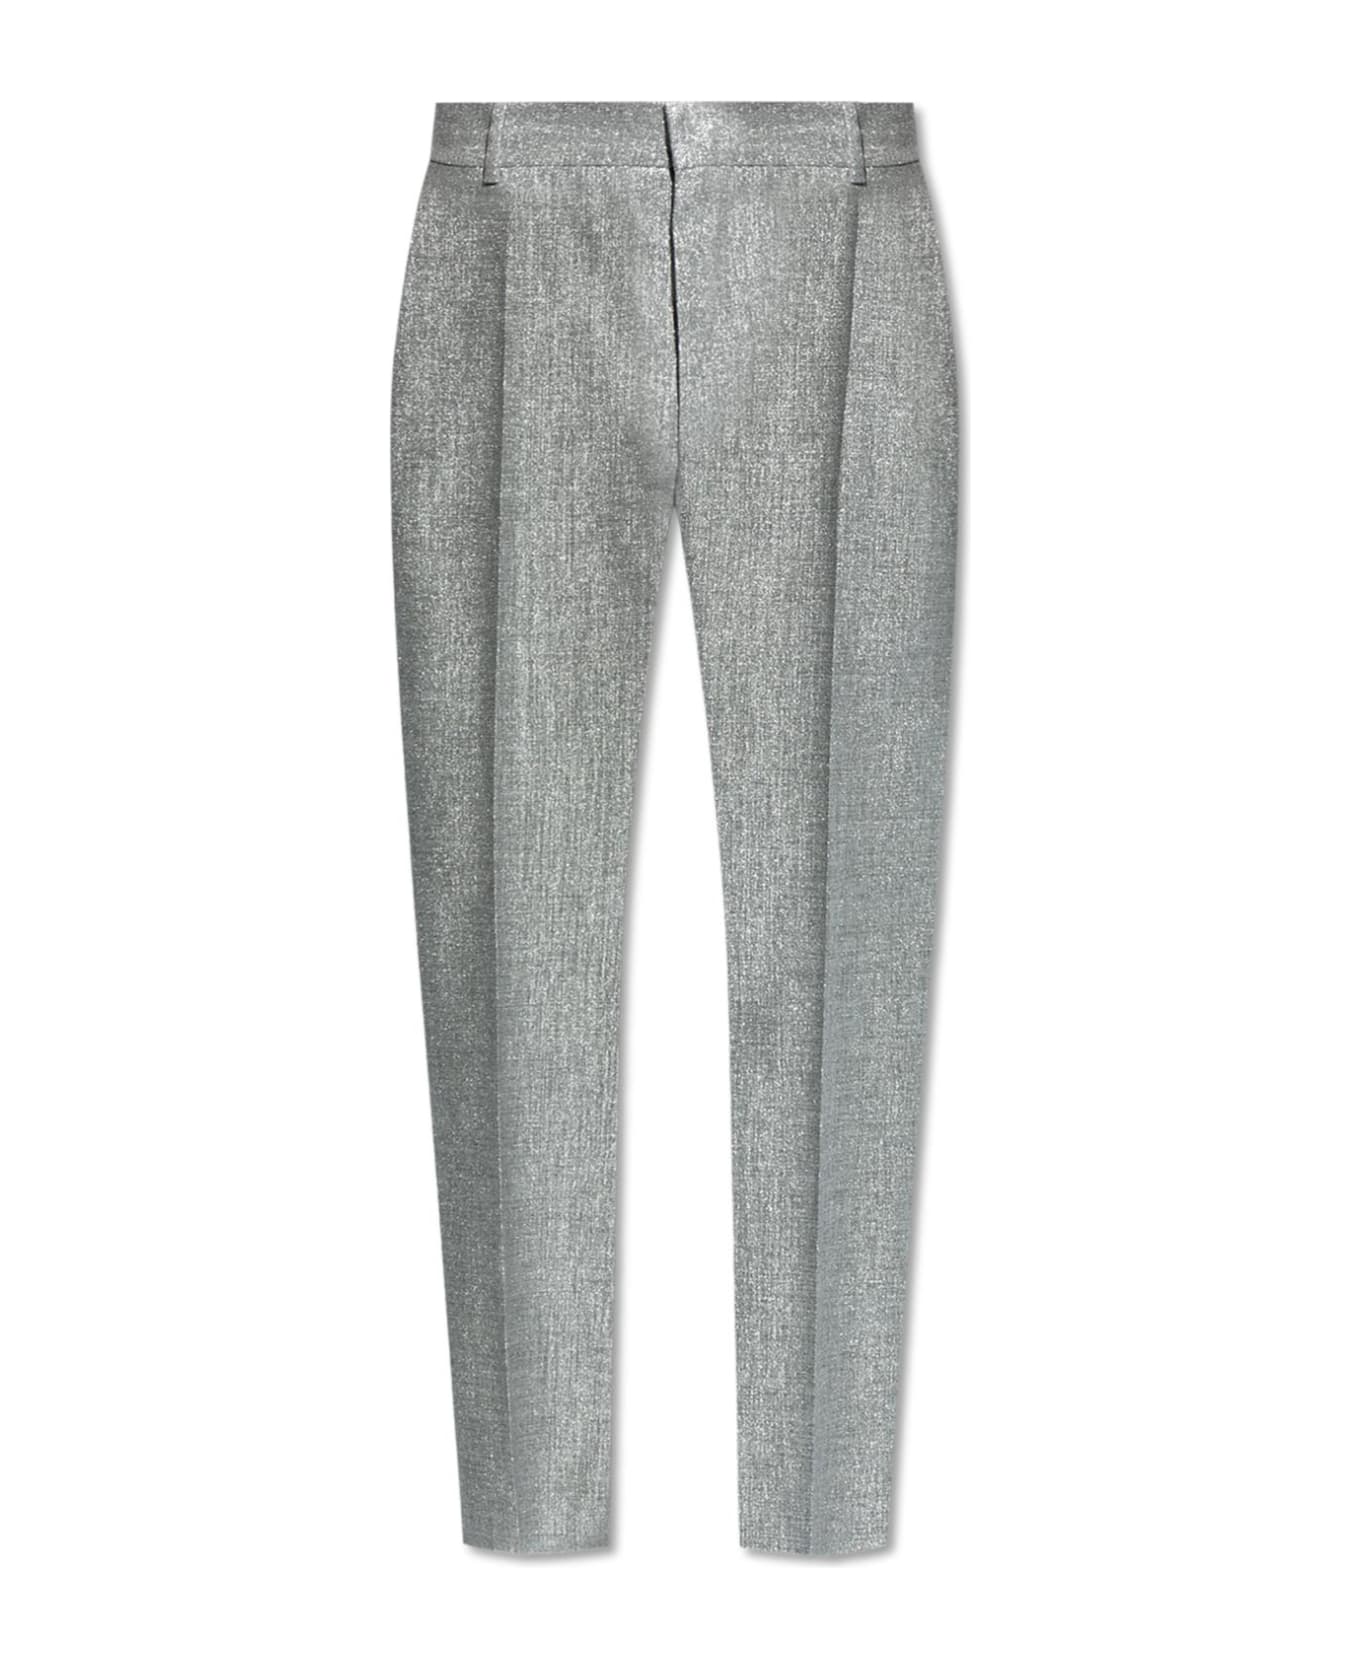 Alexander McQueen Creased Trousers - Silver ボトムス